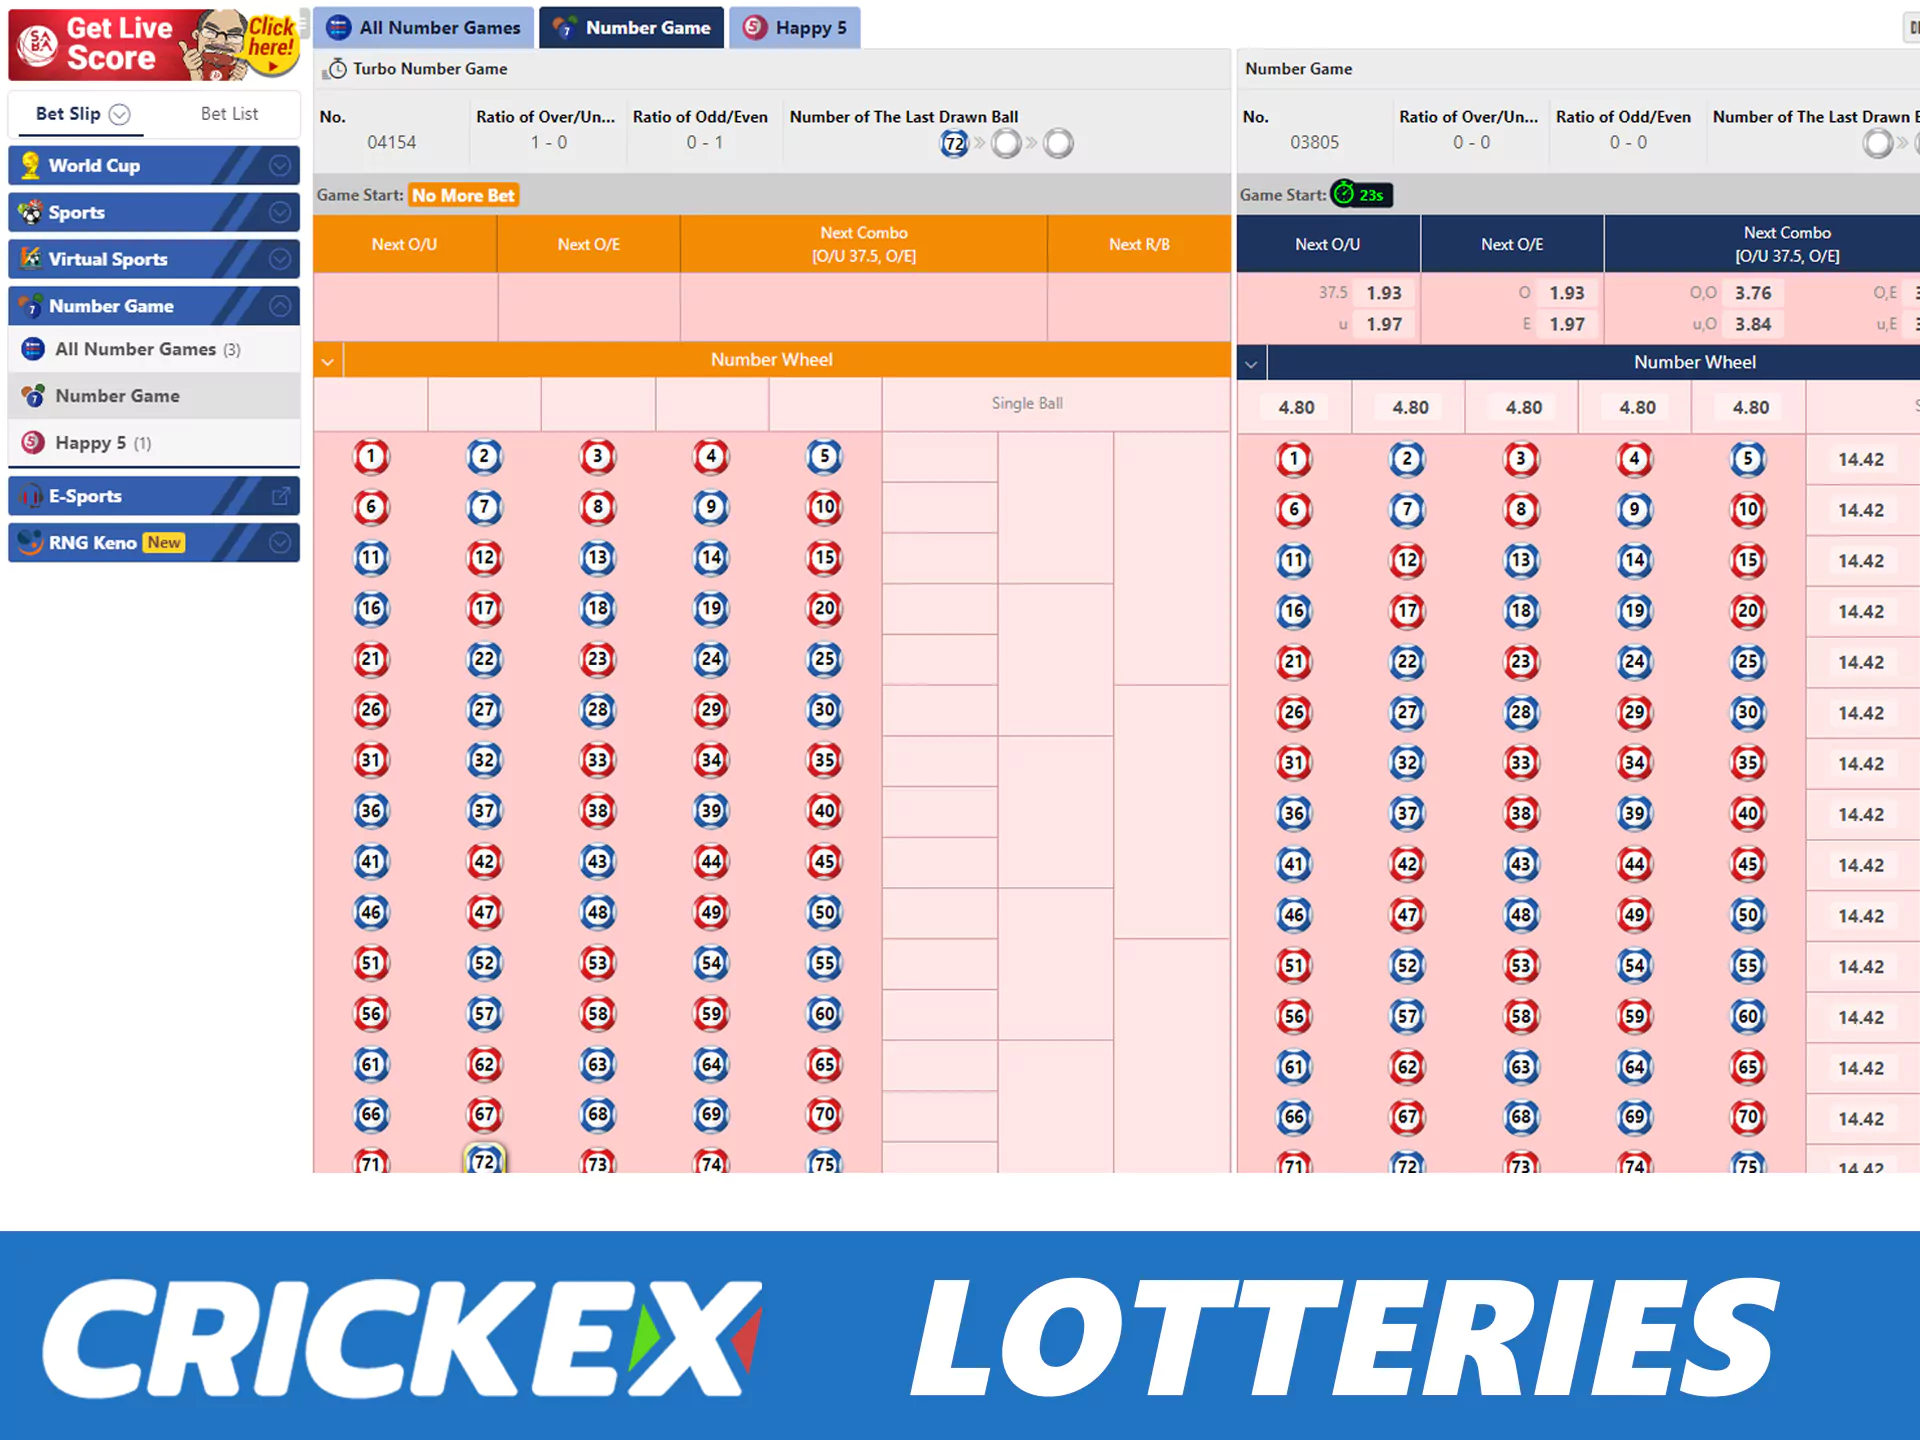 Play lotteries and win jackpot at Crickex.